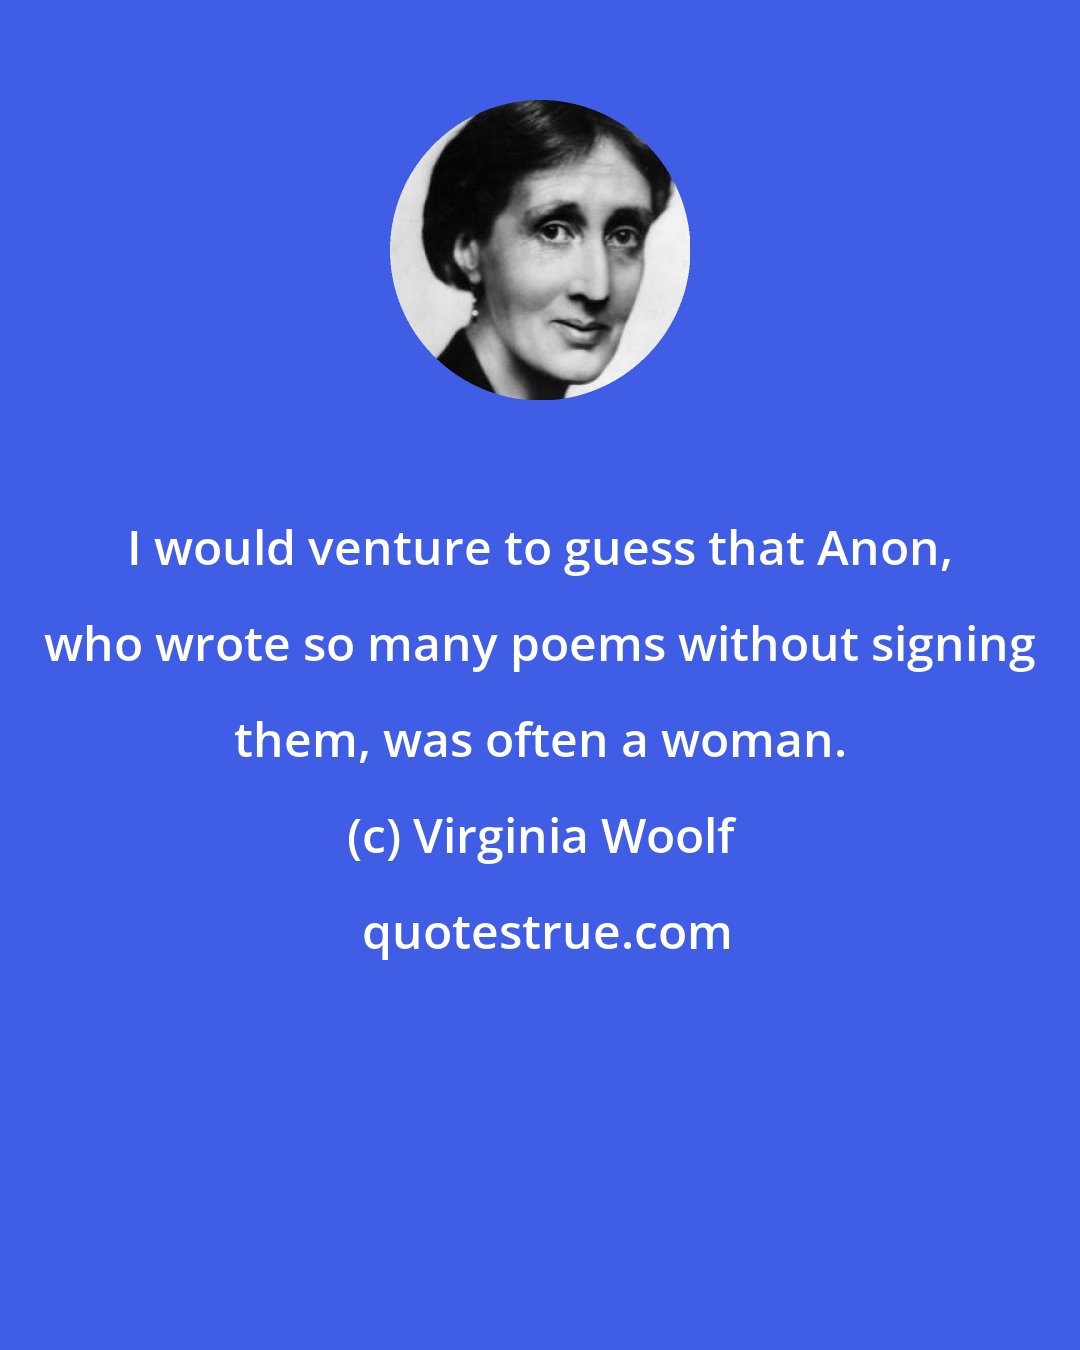 Virginia Woolf: I would venture to guess that Anon, who wrote so many poems without signing them, was often a woman.